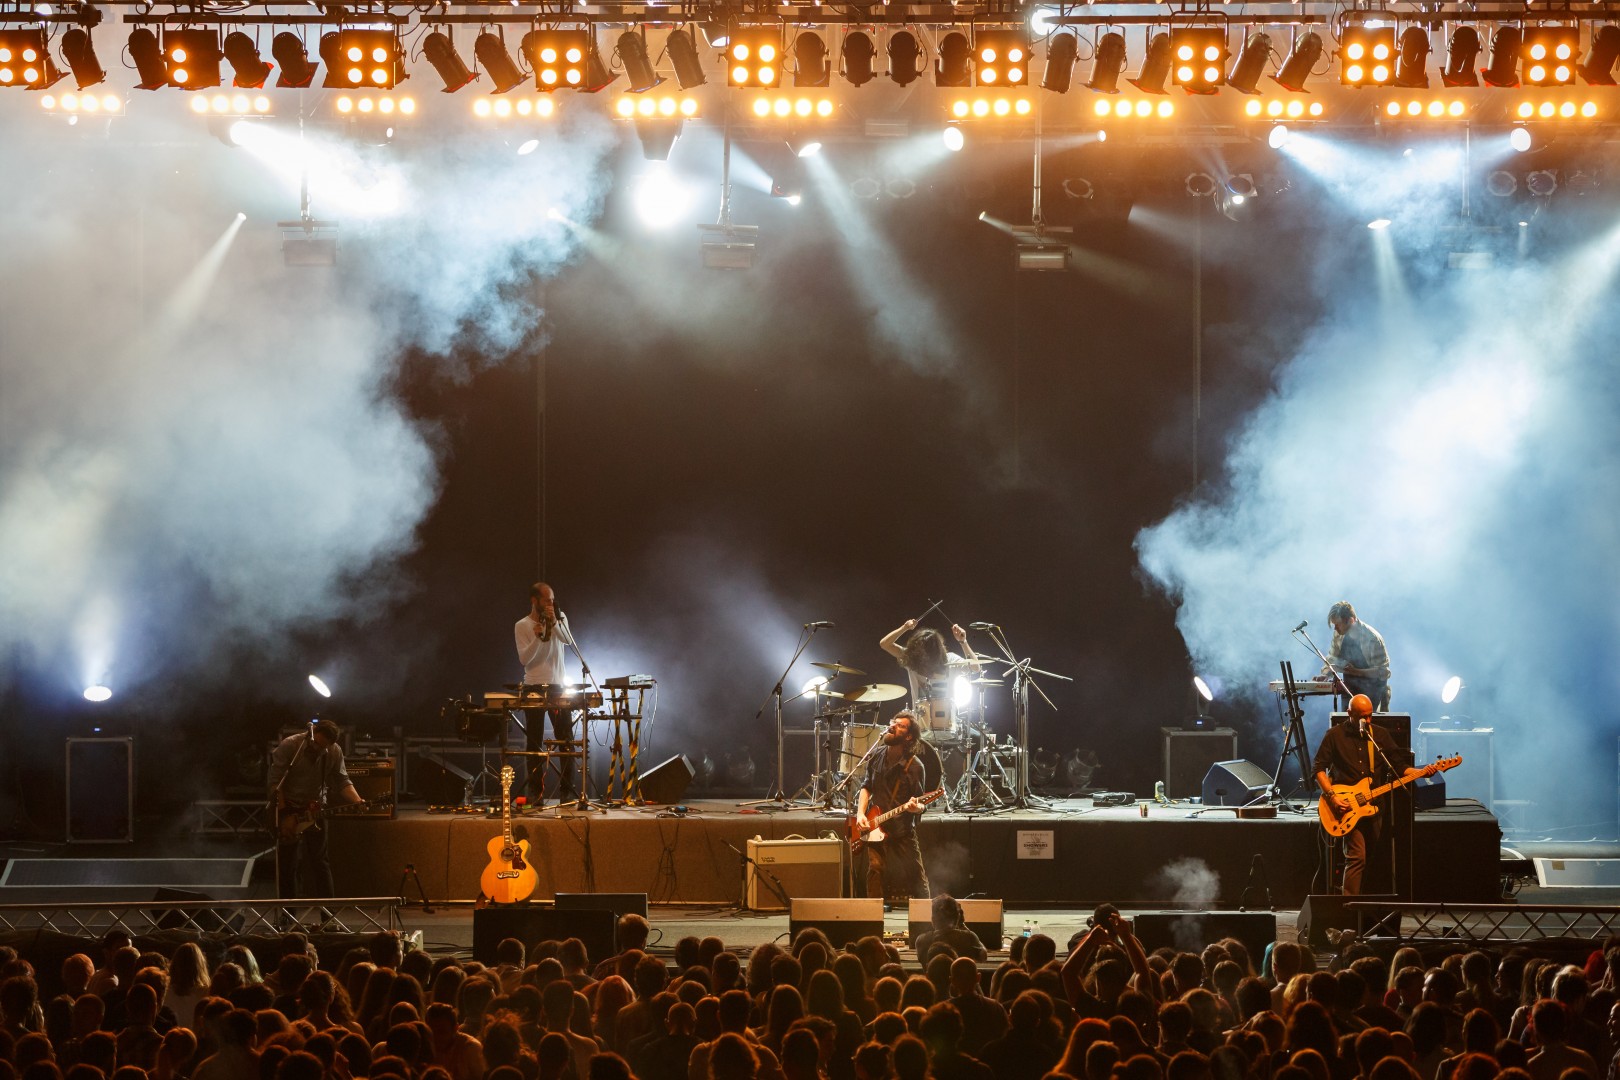 Robin And The Backstabbers at Arenele Romane in Bucharest on June 13, 2015 (f9c01c6195)